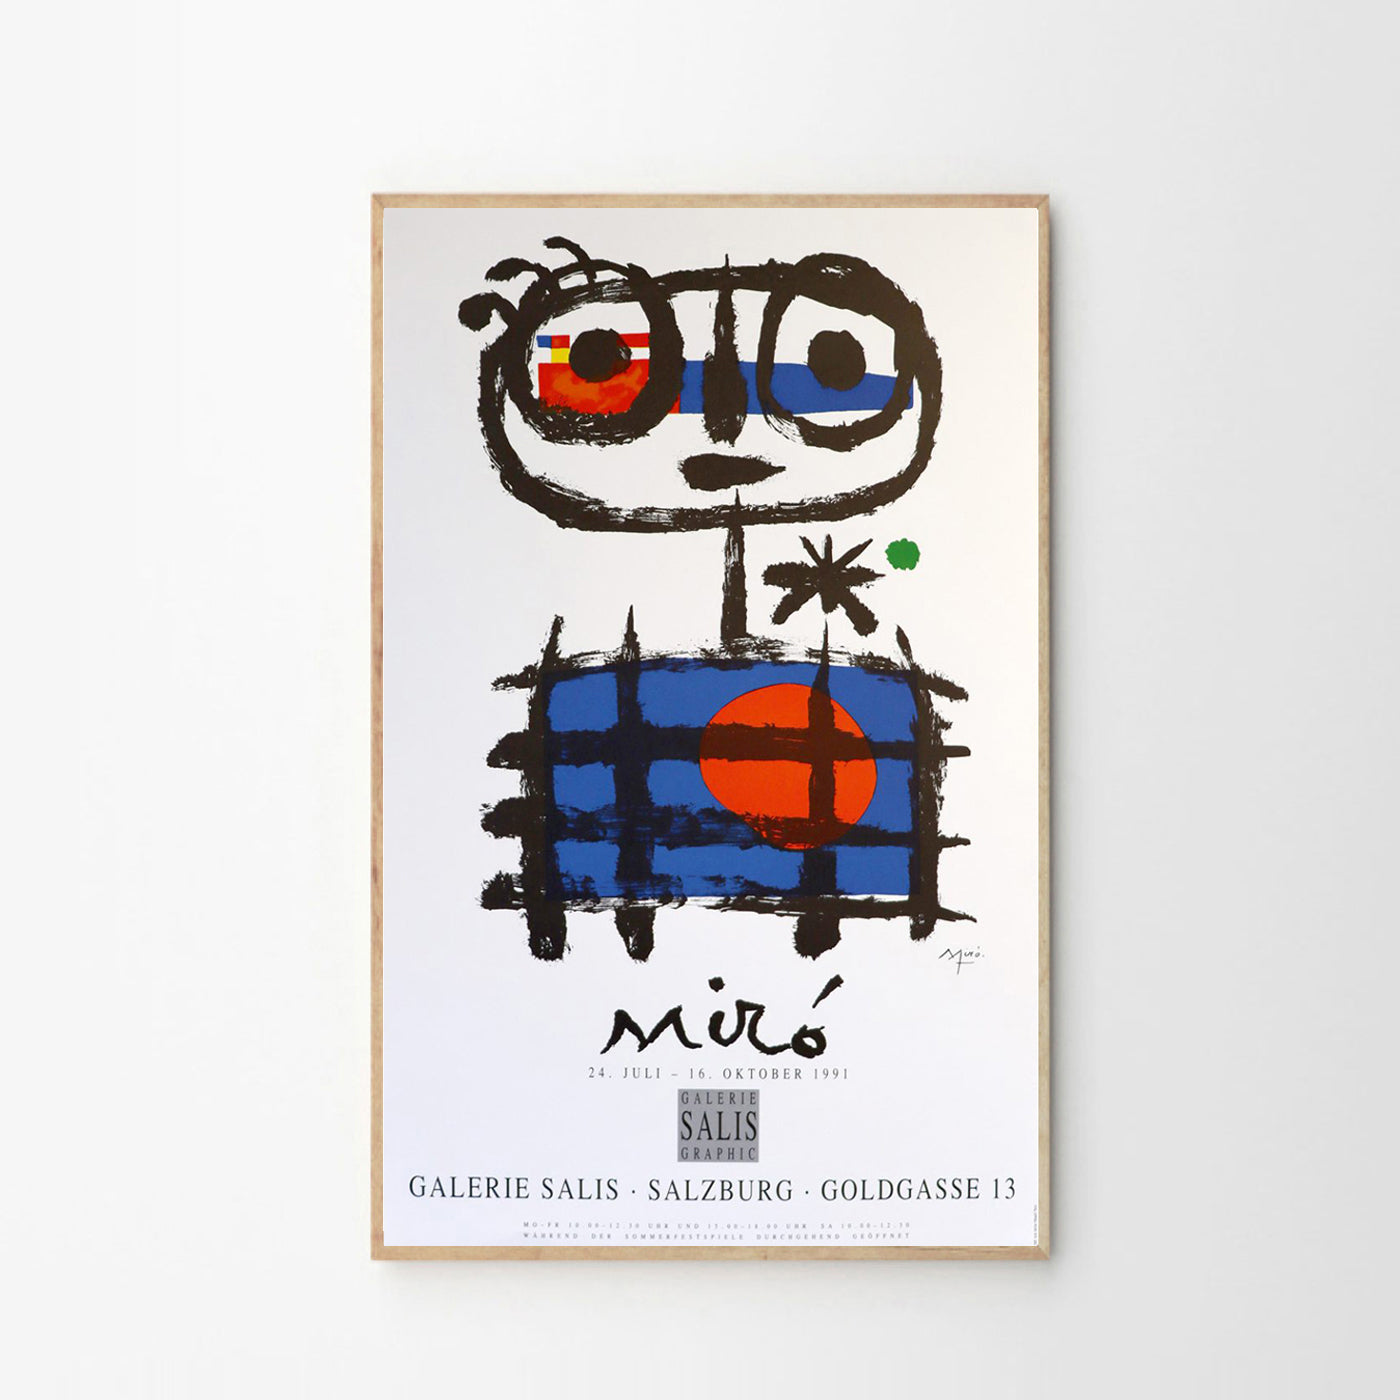 Joan Miró ‘Imaginary Boy, Sun Eater’ Poster - End of Edition